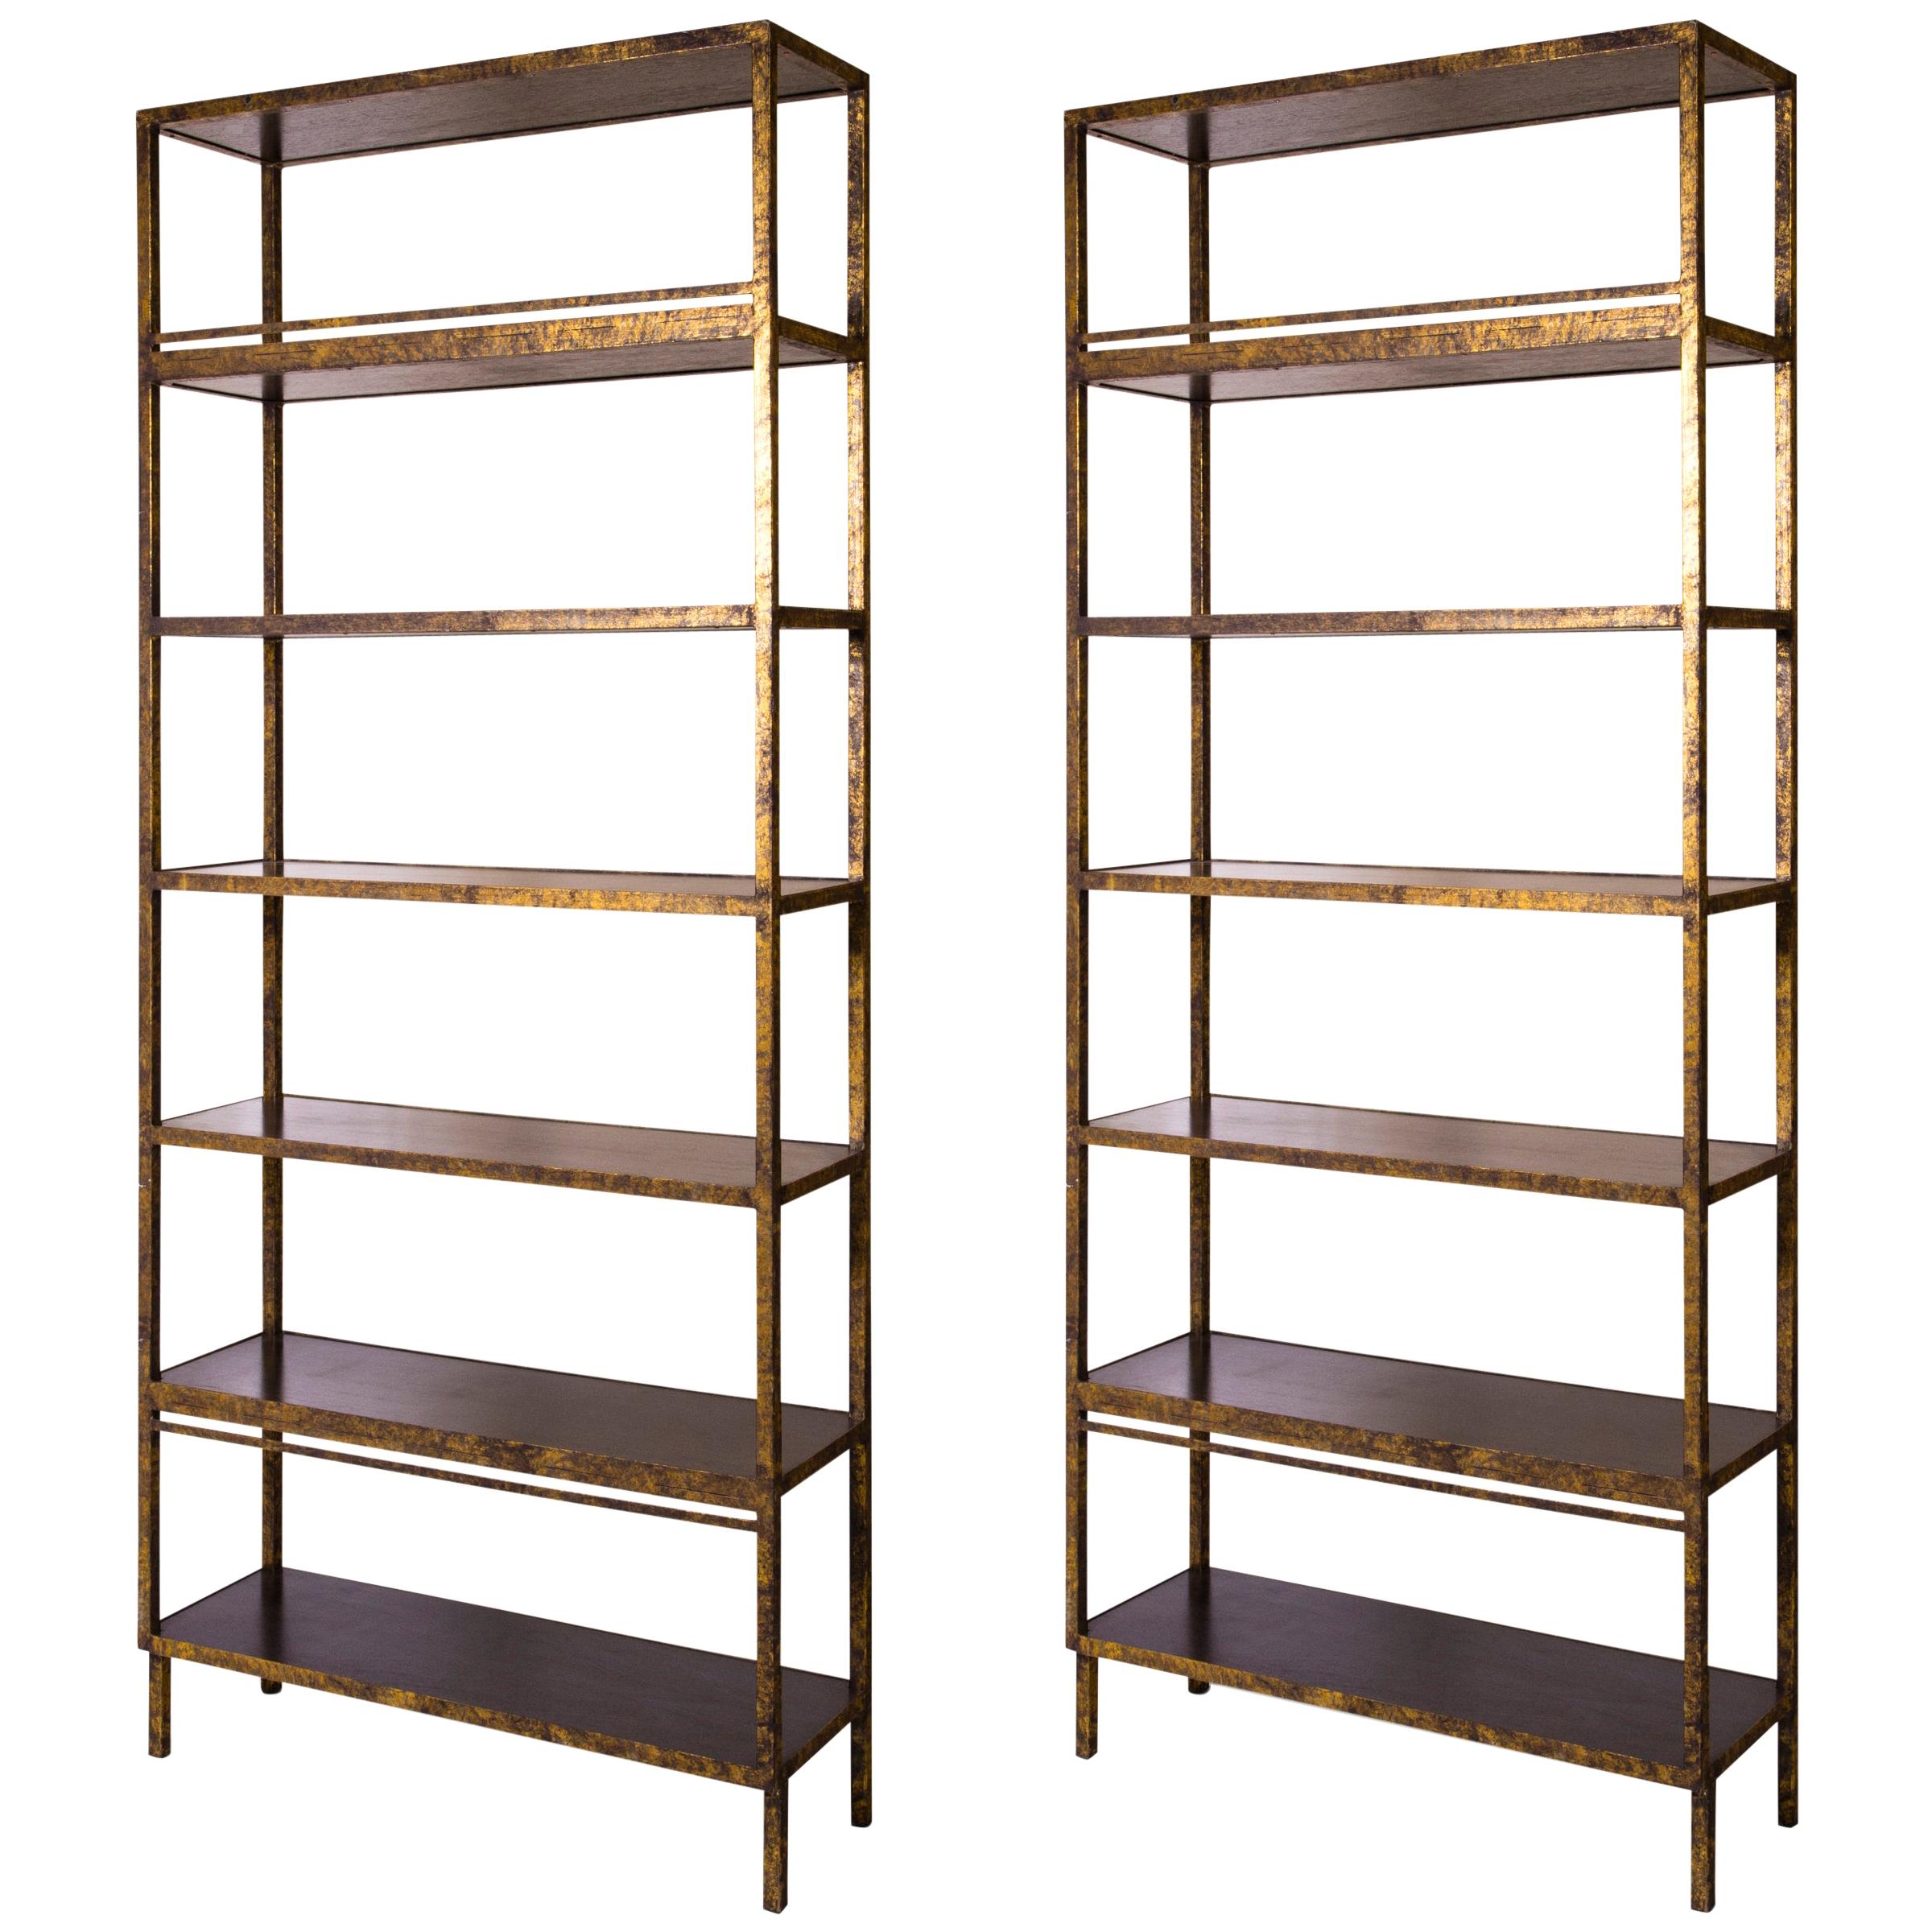 Pair of Very Tall Hand Painted Faux Antique Brass Bookcases with Walnut Shelves